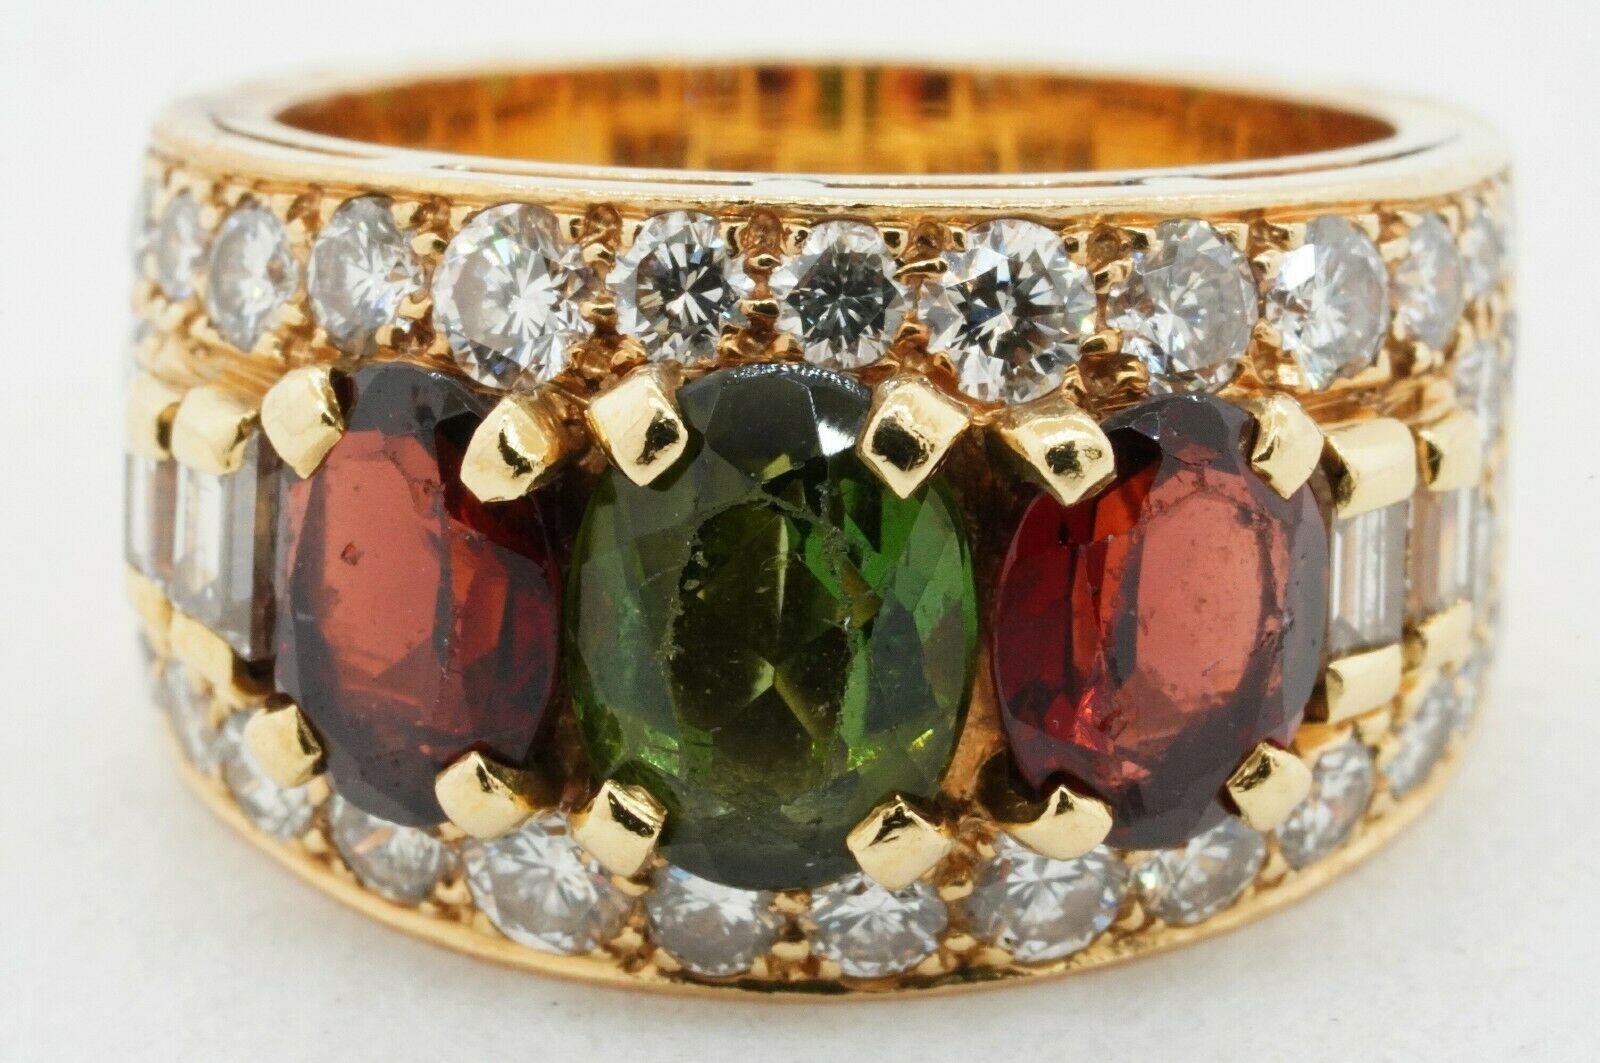 Vintage Bvlgari heavy 18K YG 5.50CT VS1/F diamond & tourmaline ring size 6.25. This alluring piece of jewelry is crafted in beautiful rich 18K yellow gold and features 3 genuine Red & Green tourmaline gems with a combined weight of approx. 2.50CT,